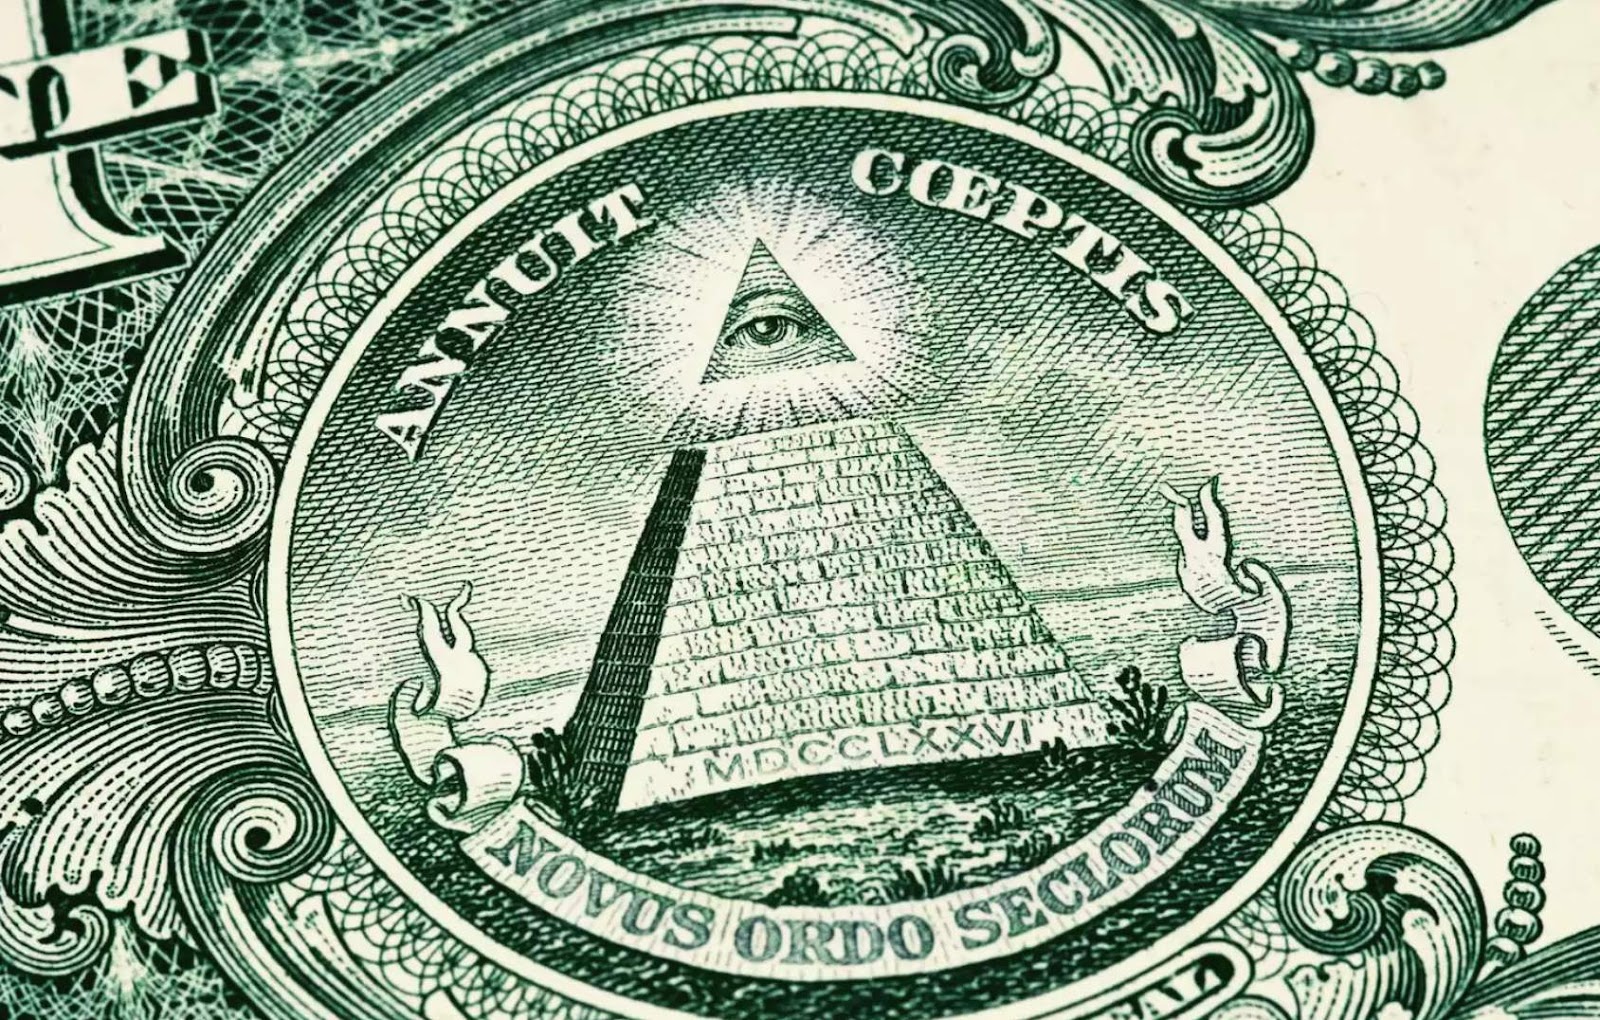 The US Dollar bill has the all-seeing eye